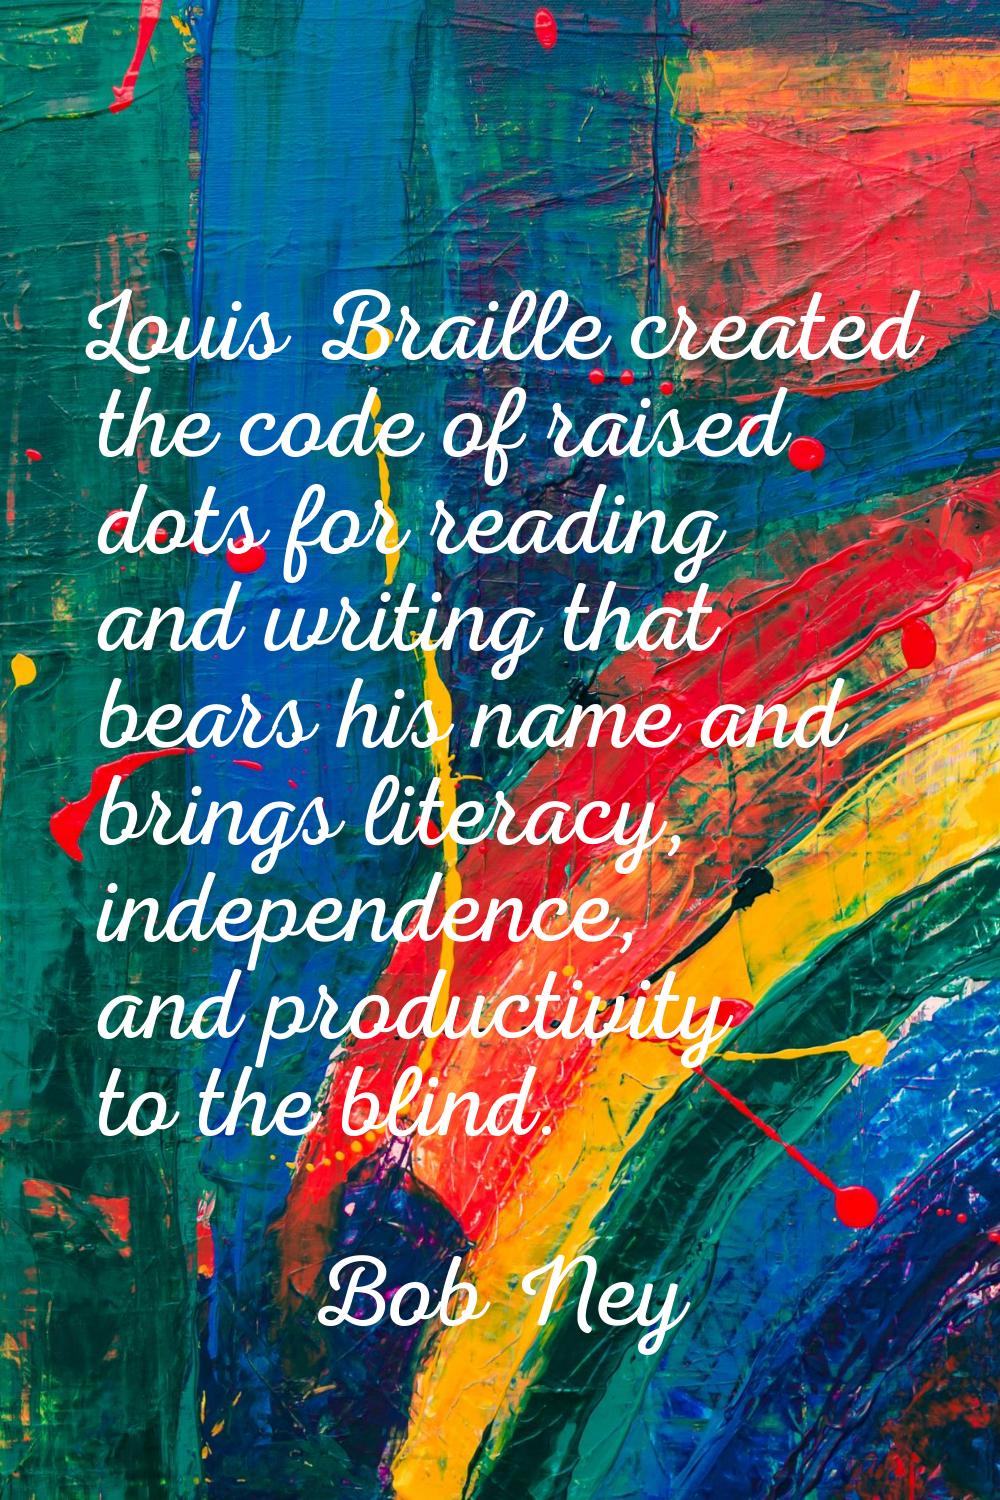 Louis Braille created the code of raised dots for reading and writing that bears his name and bring